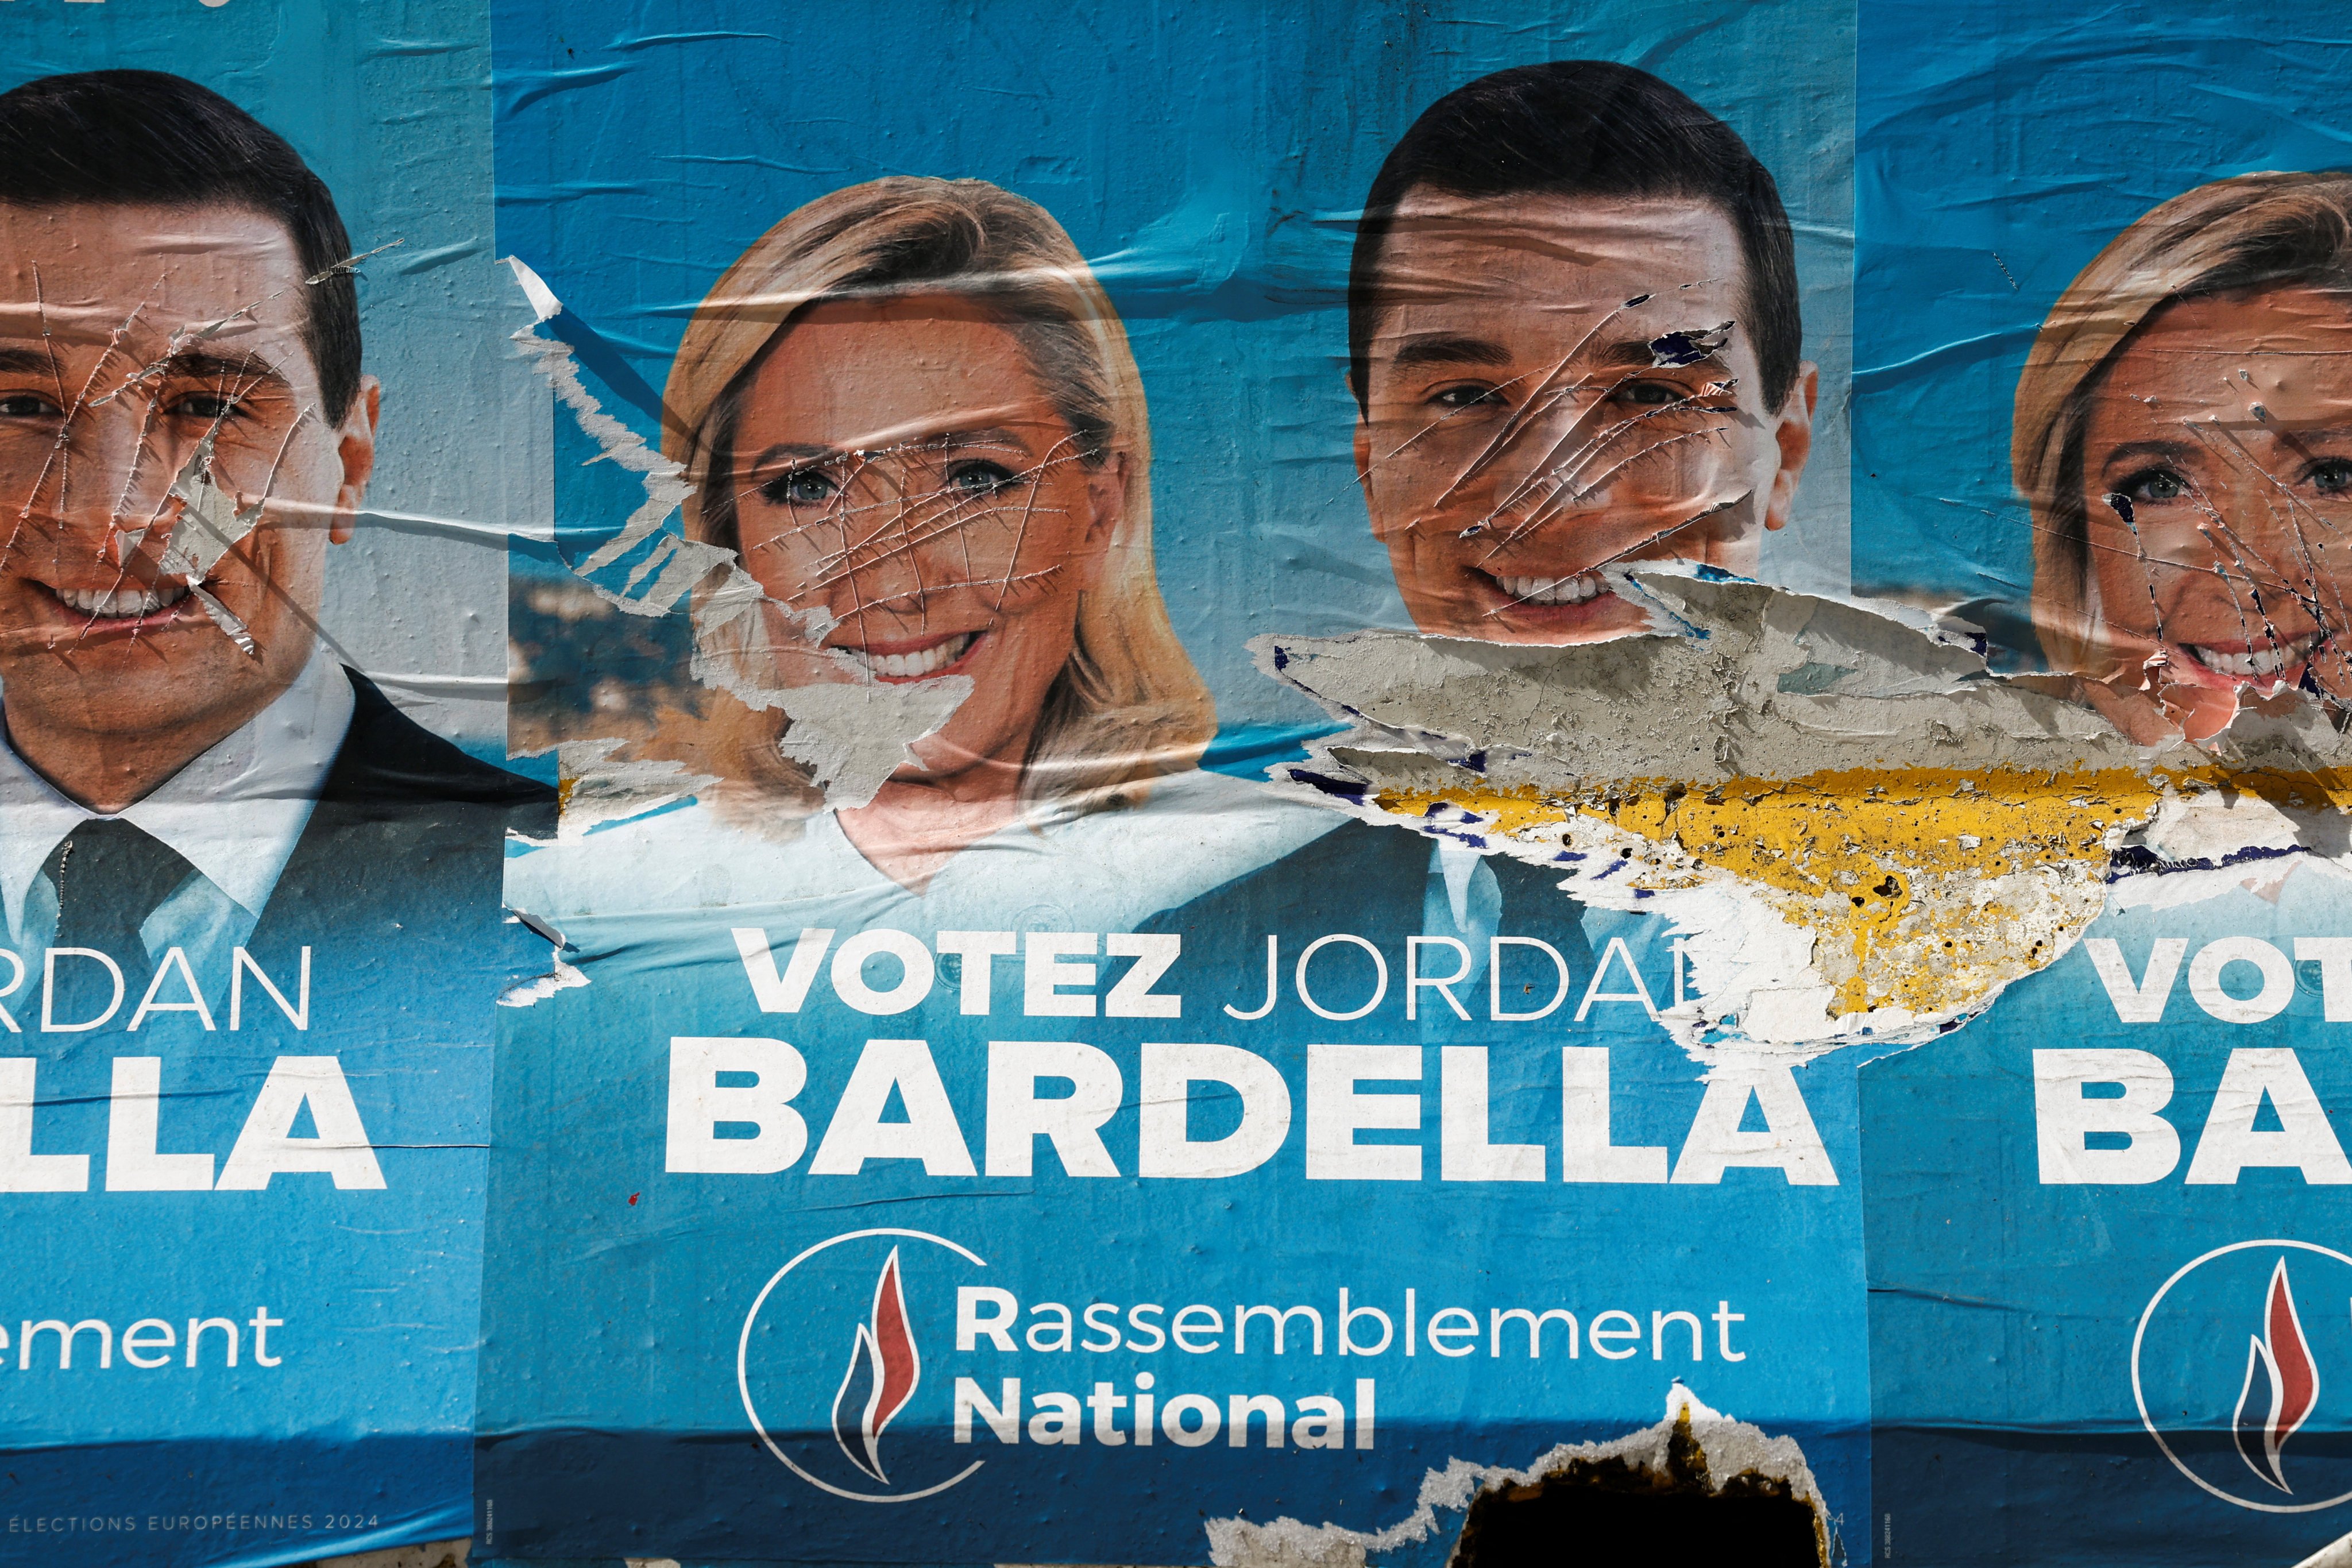 Election posters for the French far-right National Rally party with pictures of leaders Marine Le Pen and Jordan Bardella are seen near the party’s headquarters on Friday before the second round of parliamentary elections this weekend. Photo: Reuters